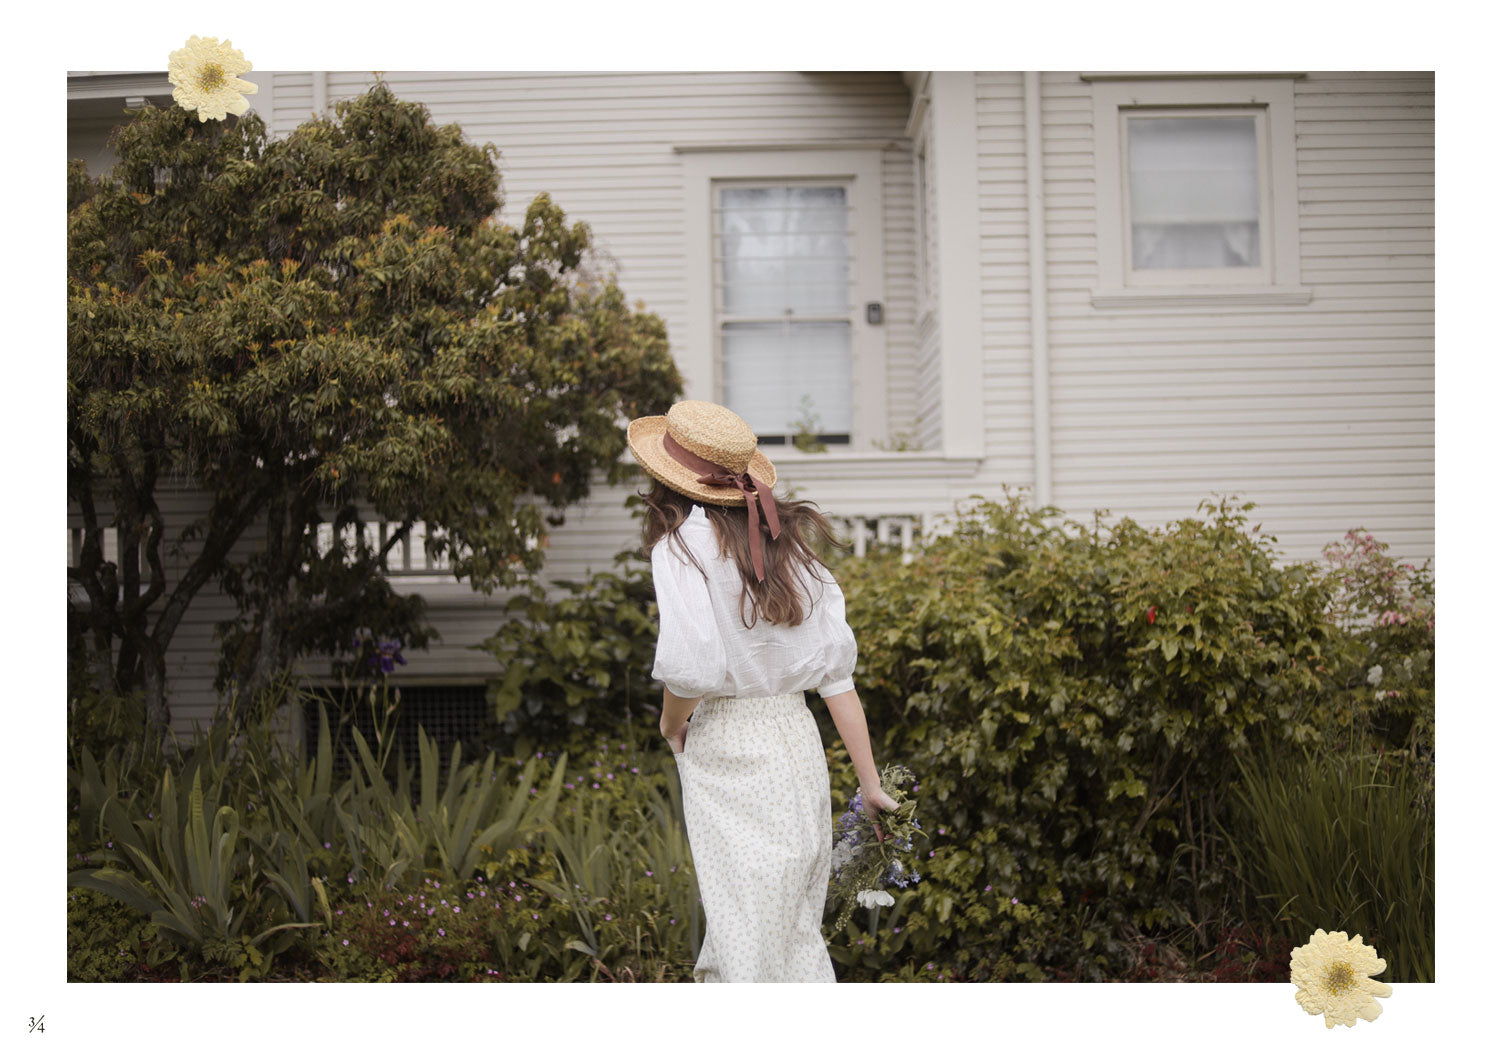 Adored Vintage “Find Her in the Garden” Spring Photo Story by Rodellee Bas